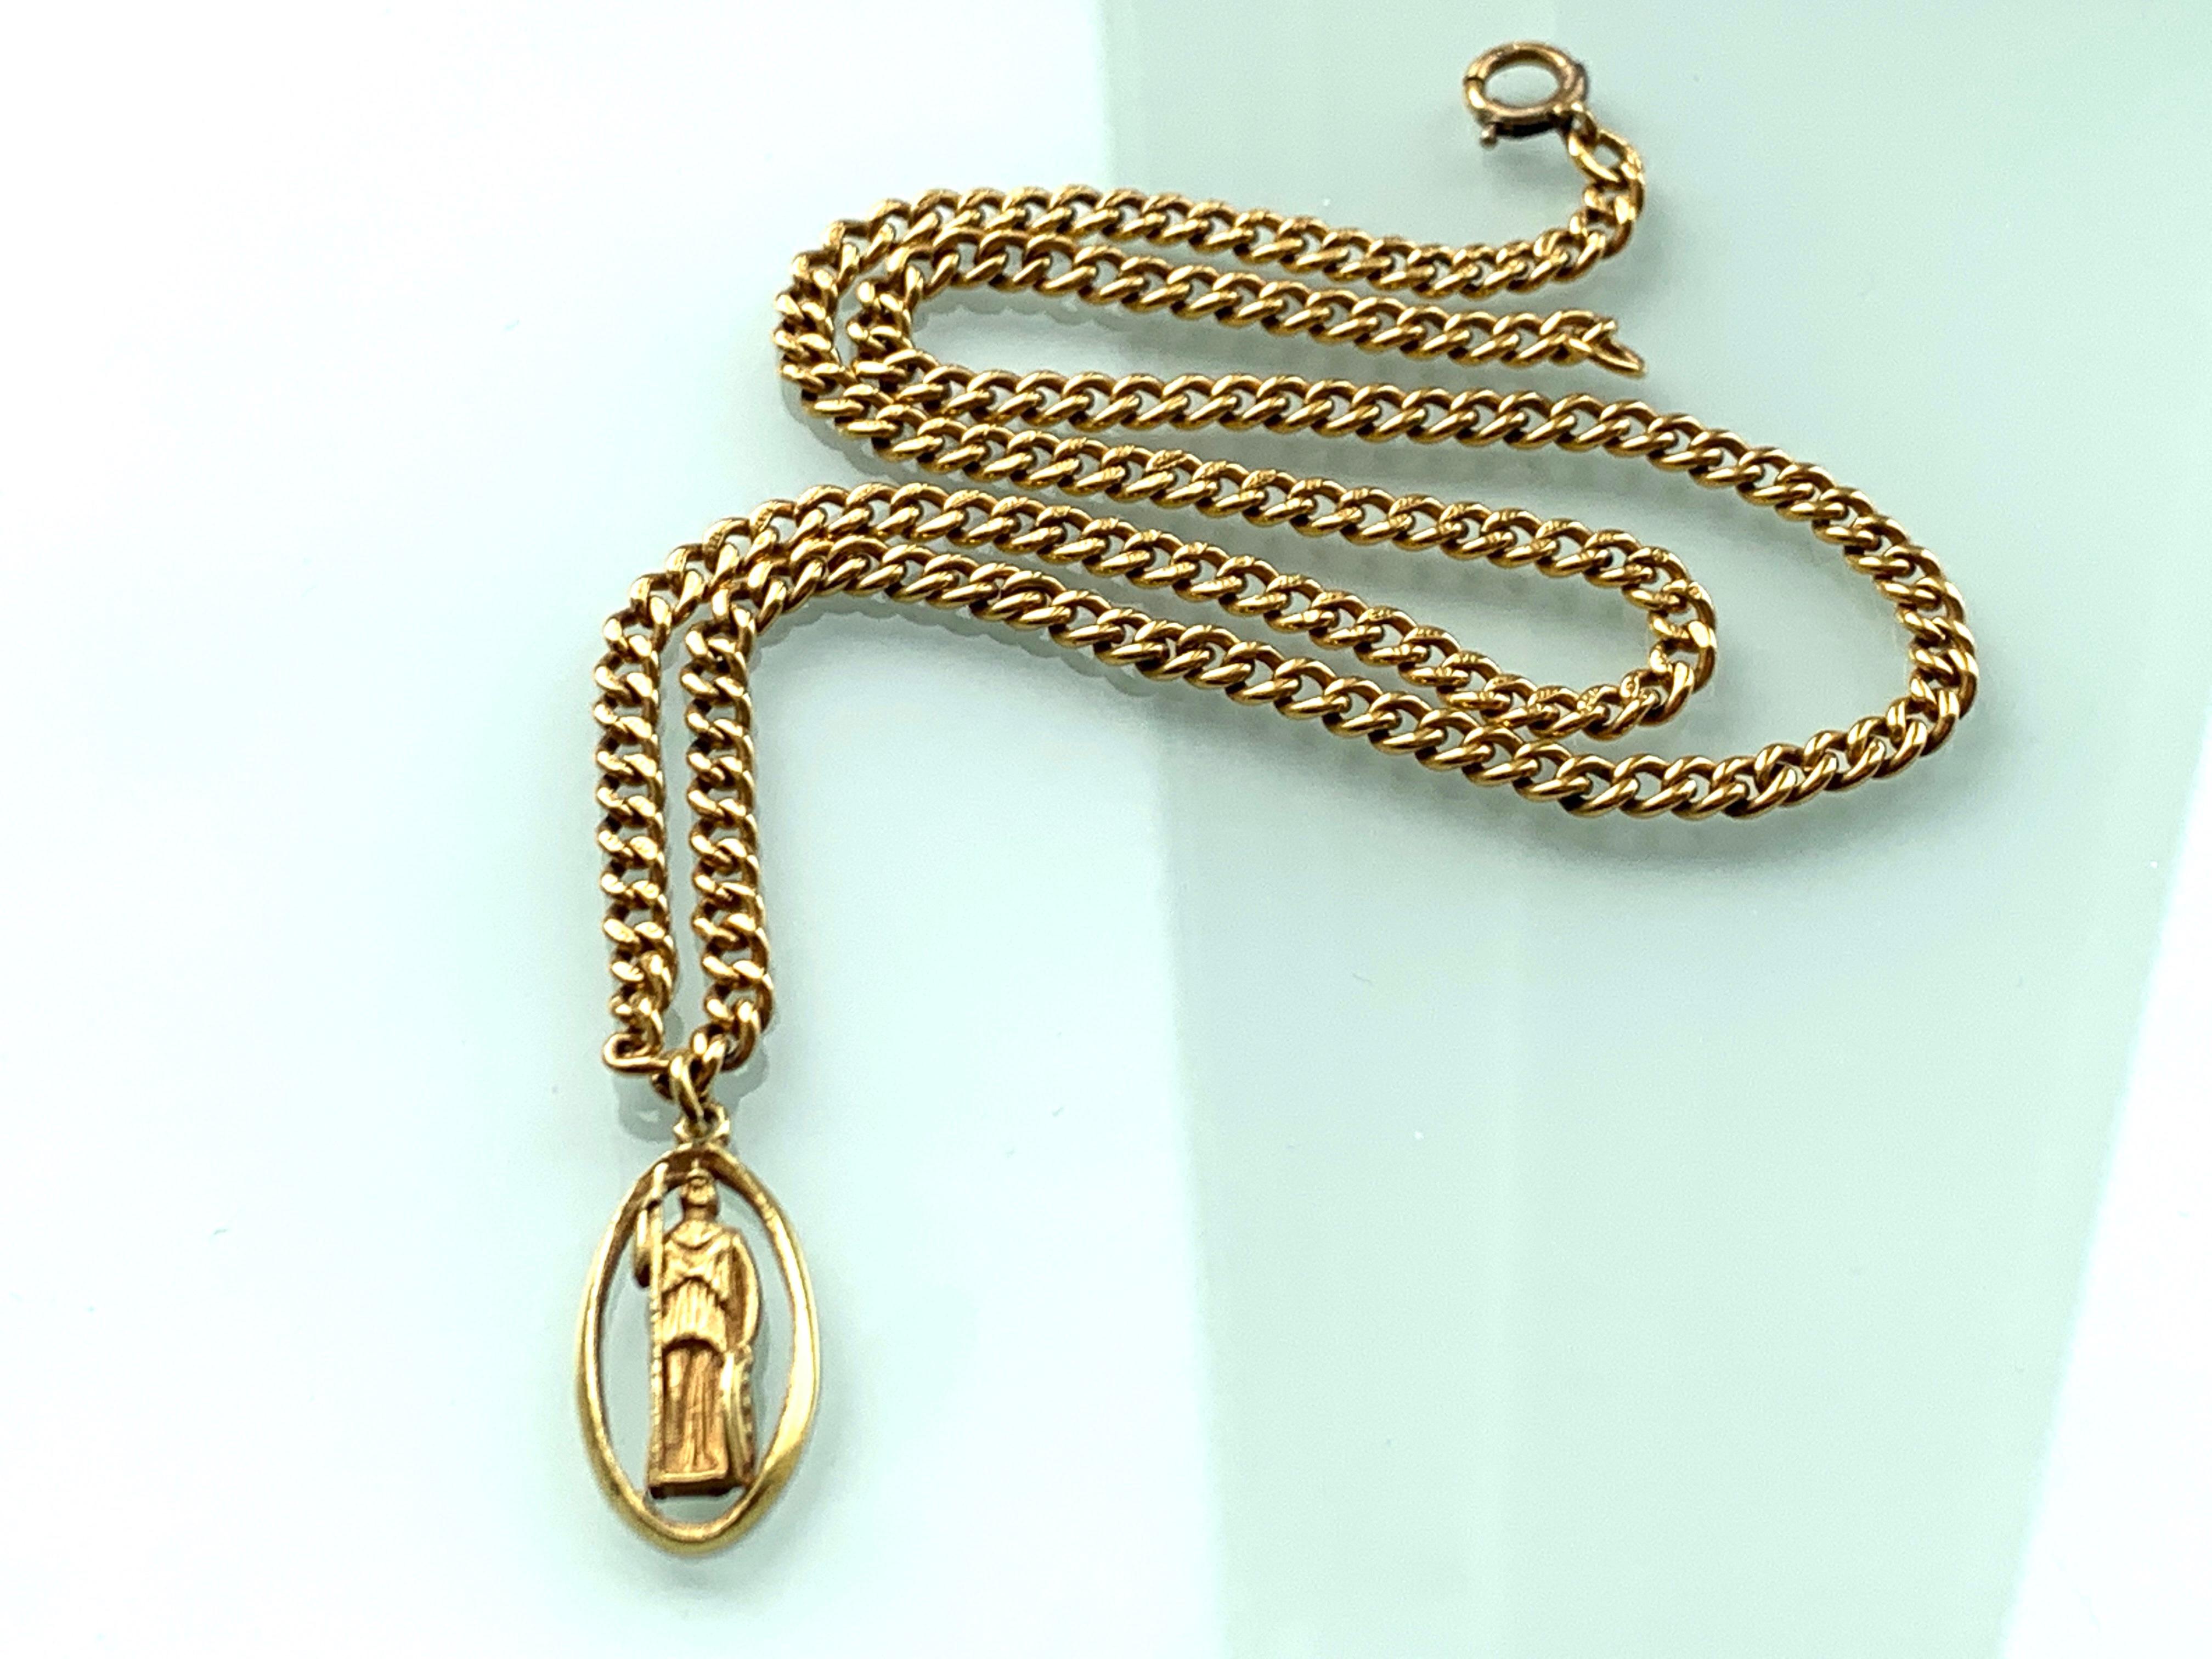 Vintage 18ct 750 Gold Brutalist Roman Guard Pendant
& Antique 9ct 375 Gold Chain
 
Chain is Deep yellow Gold with a  9 375 stamp on every link - era 1910
Chain Length - 18.25 Inches 
               Thickness - 4mm
               Depth - 1.2 mm
Chain